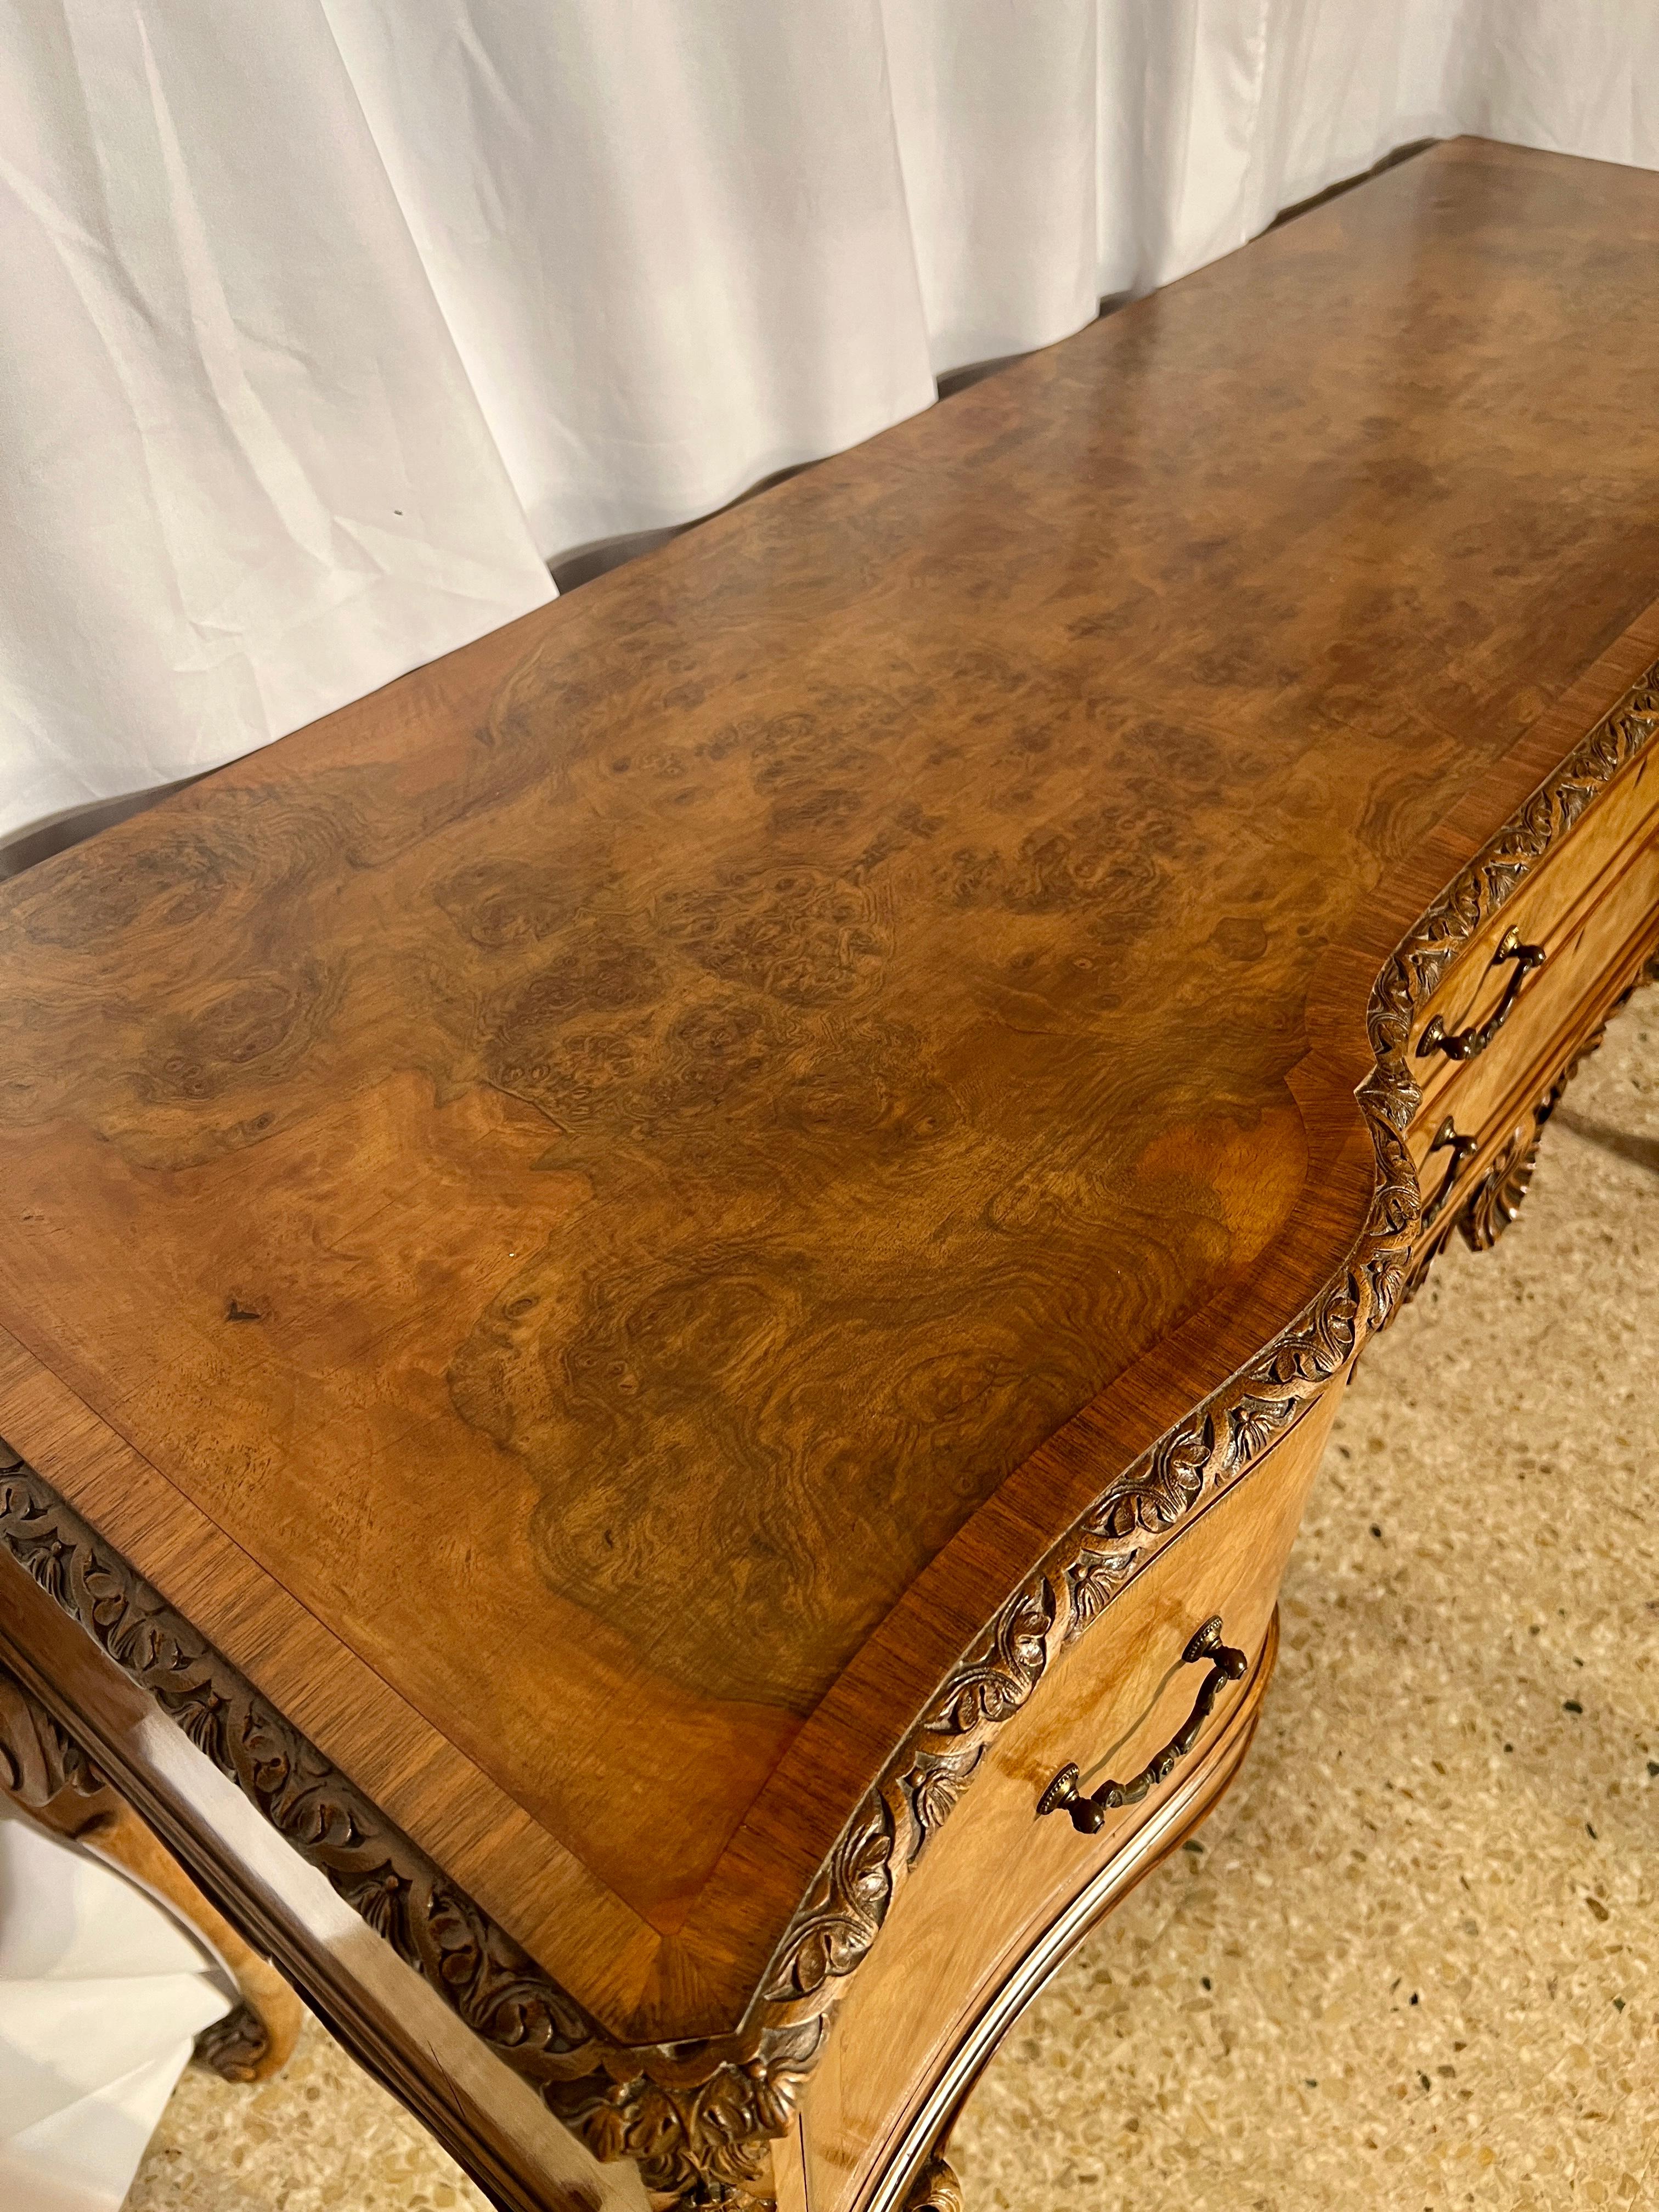 Antique English Burled Walnut Silver Chest on Legs with Flatware Included, Circa 1900.
The last photograph is shown with 2 coordinating pieces that are sold individually:
1. Dining Table: Reference LU2854336477202 or EDT117
2. Dining Chairs: